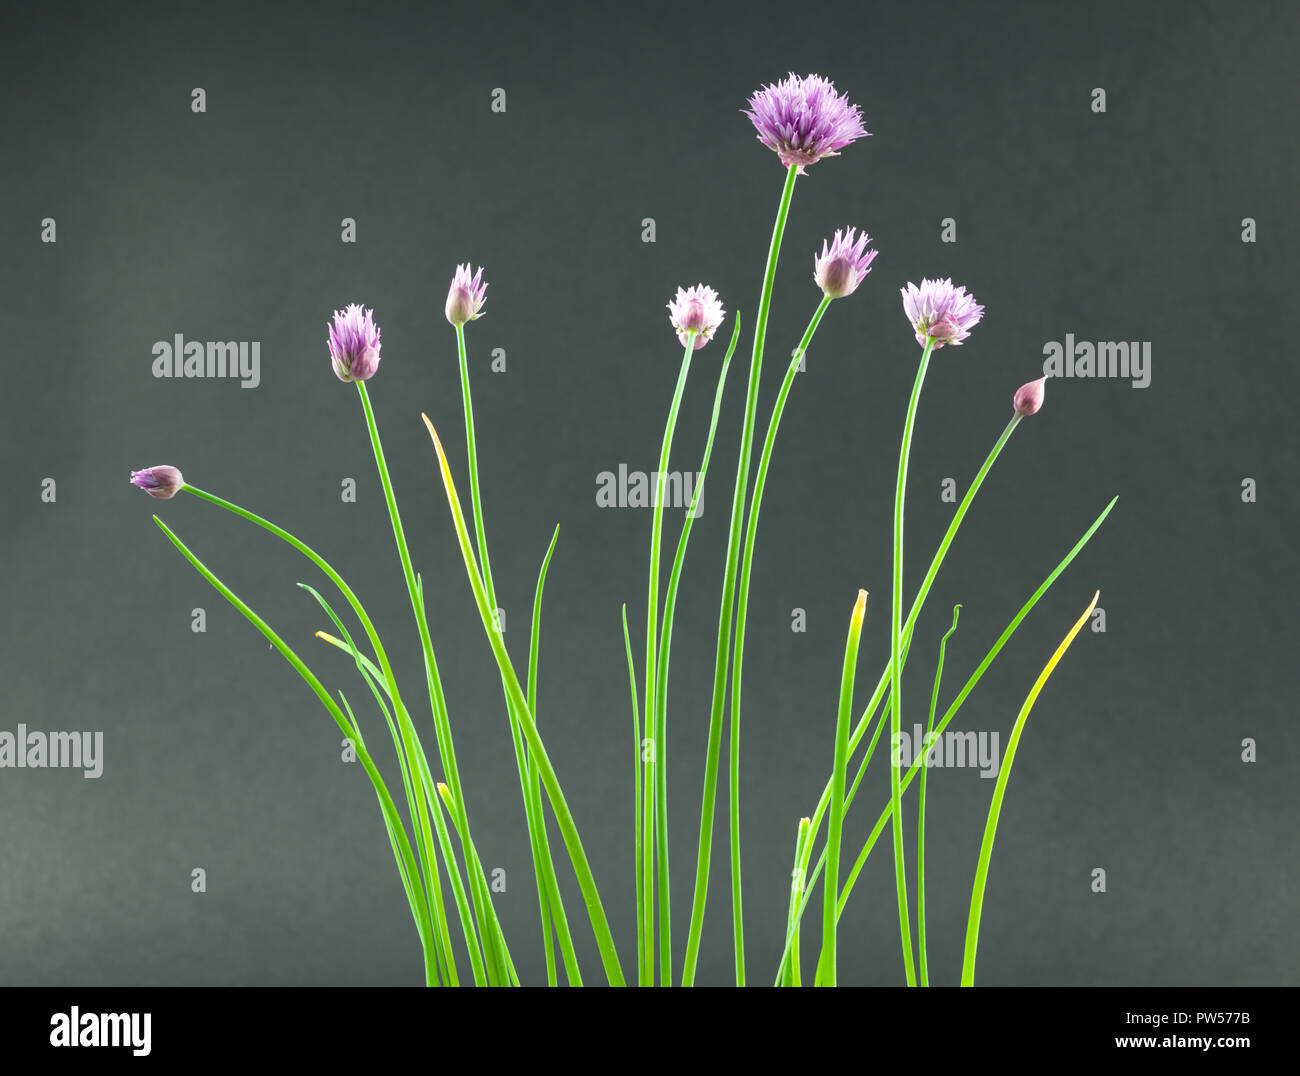 Flowers of chive plant. Chives (Allium schoenoprasum) are an edible species of the genus Allium. Their close relatives include the garlic, shallot, le Stock Photo